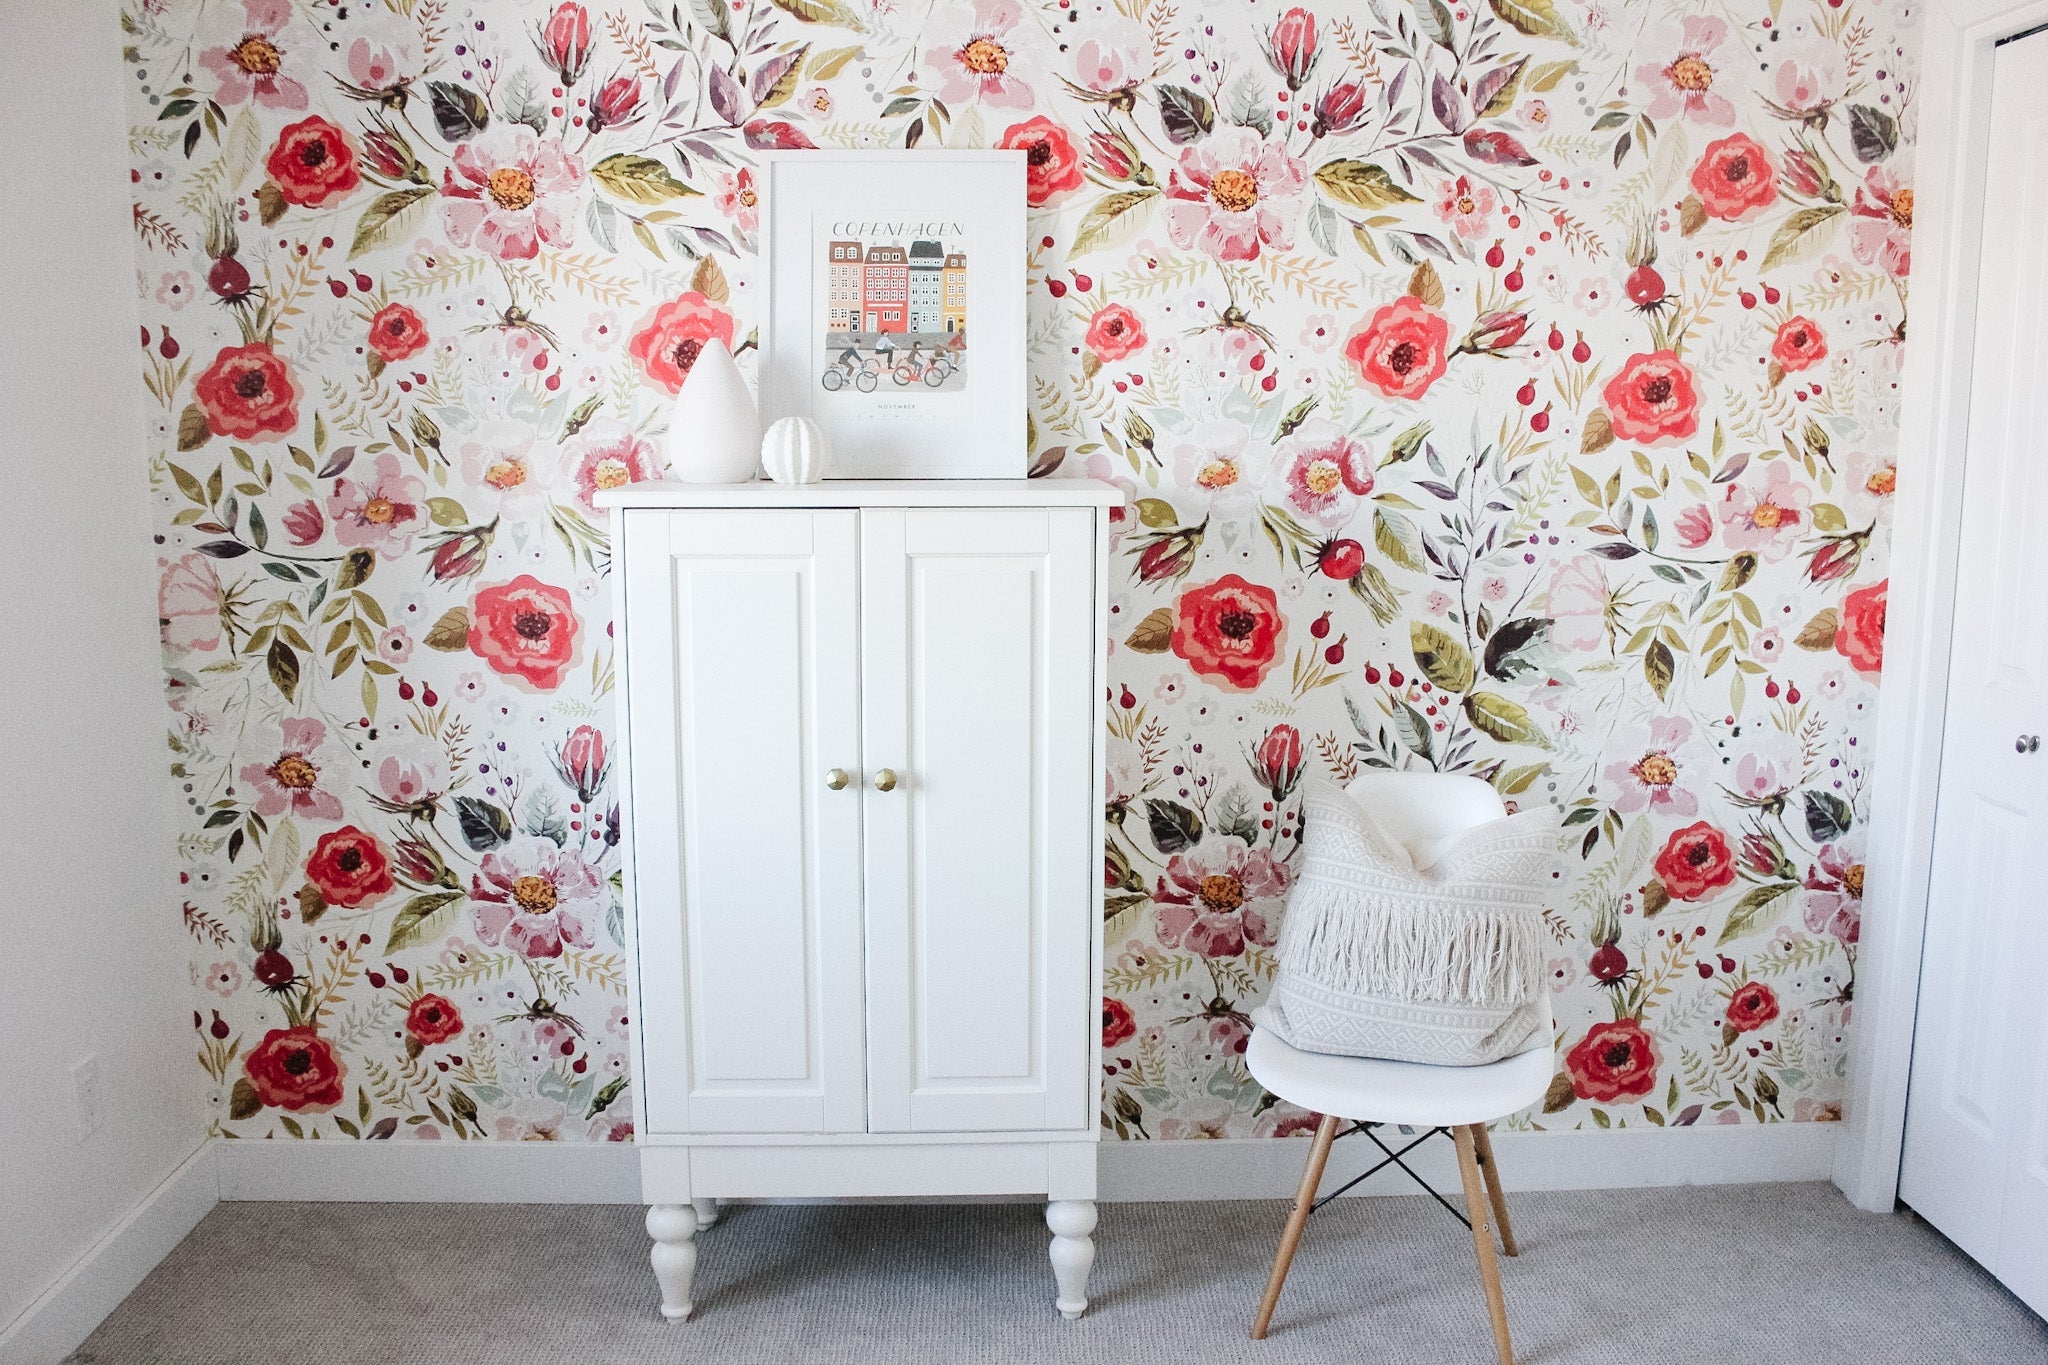 bohemian wallpaper, removable peel and stick wallpaper, wall paper, wall paper peel and stick